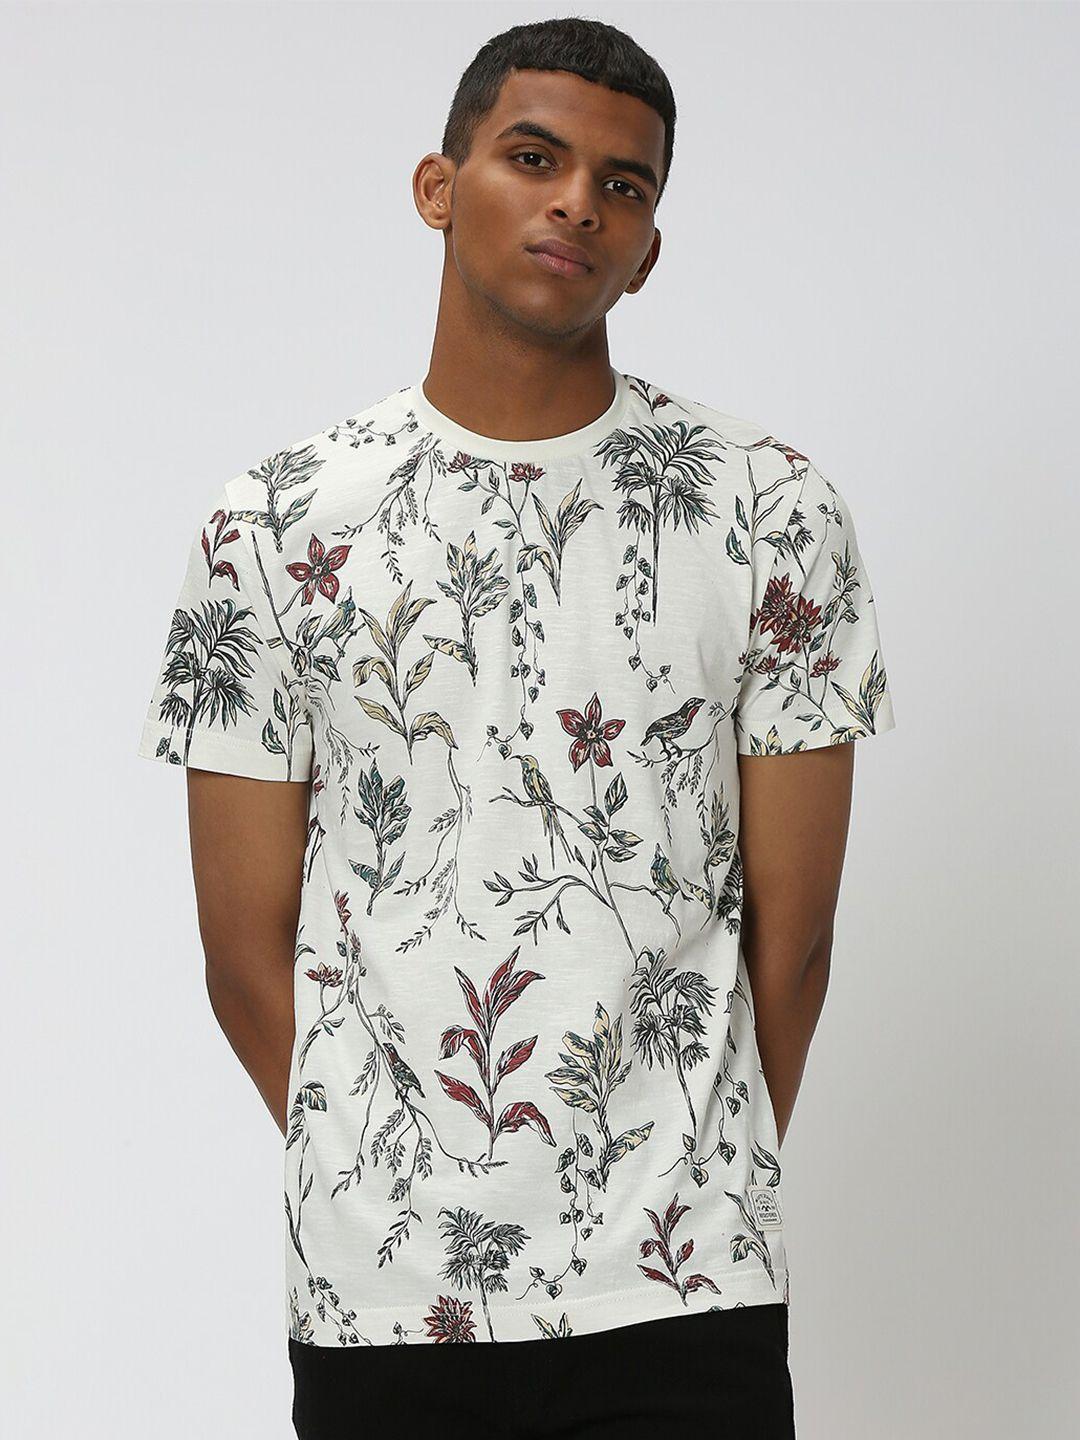 mufti men off white & light silver floral printed pockets slim fit t-shirt